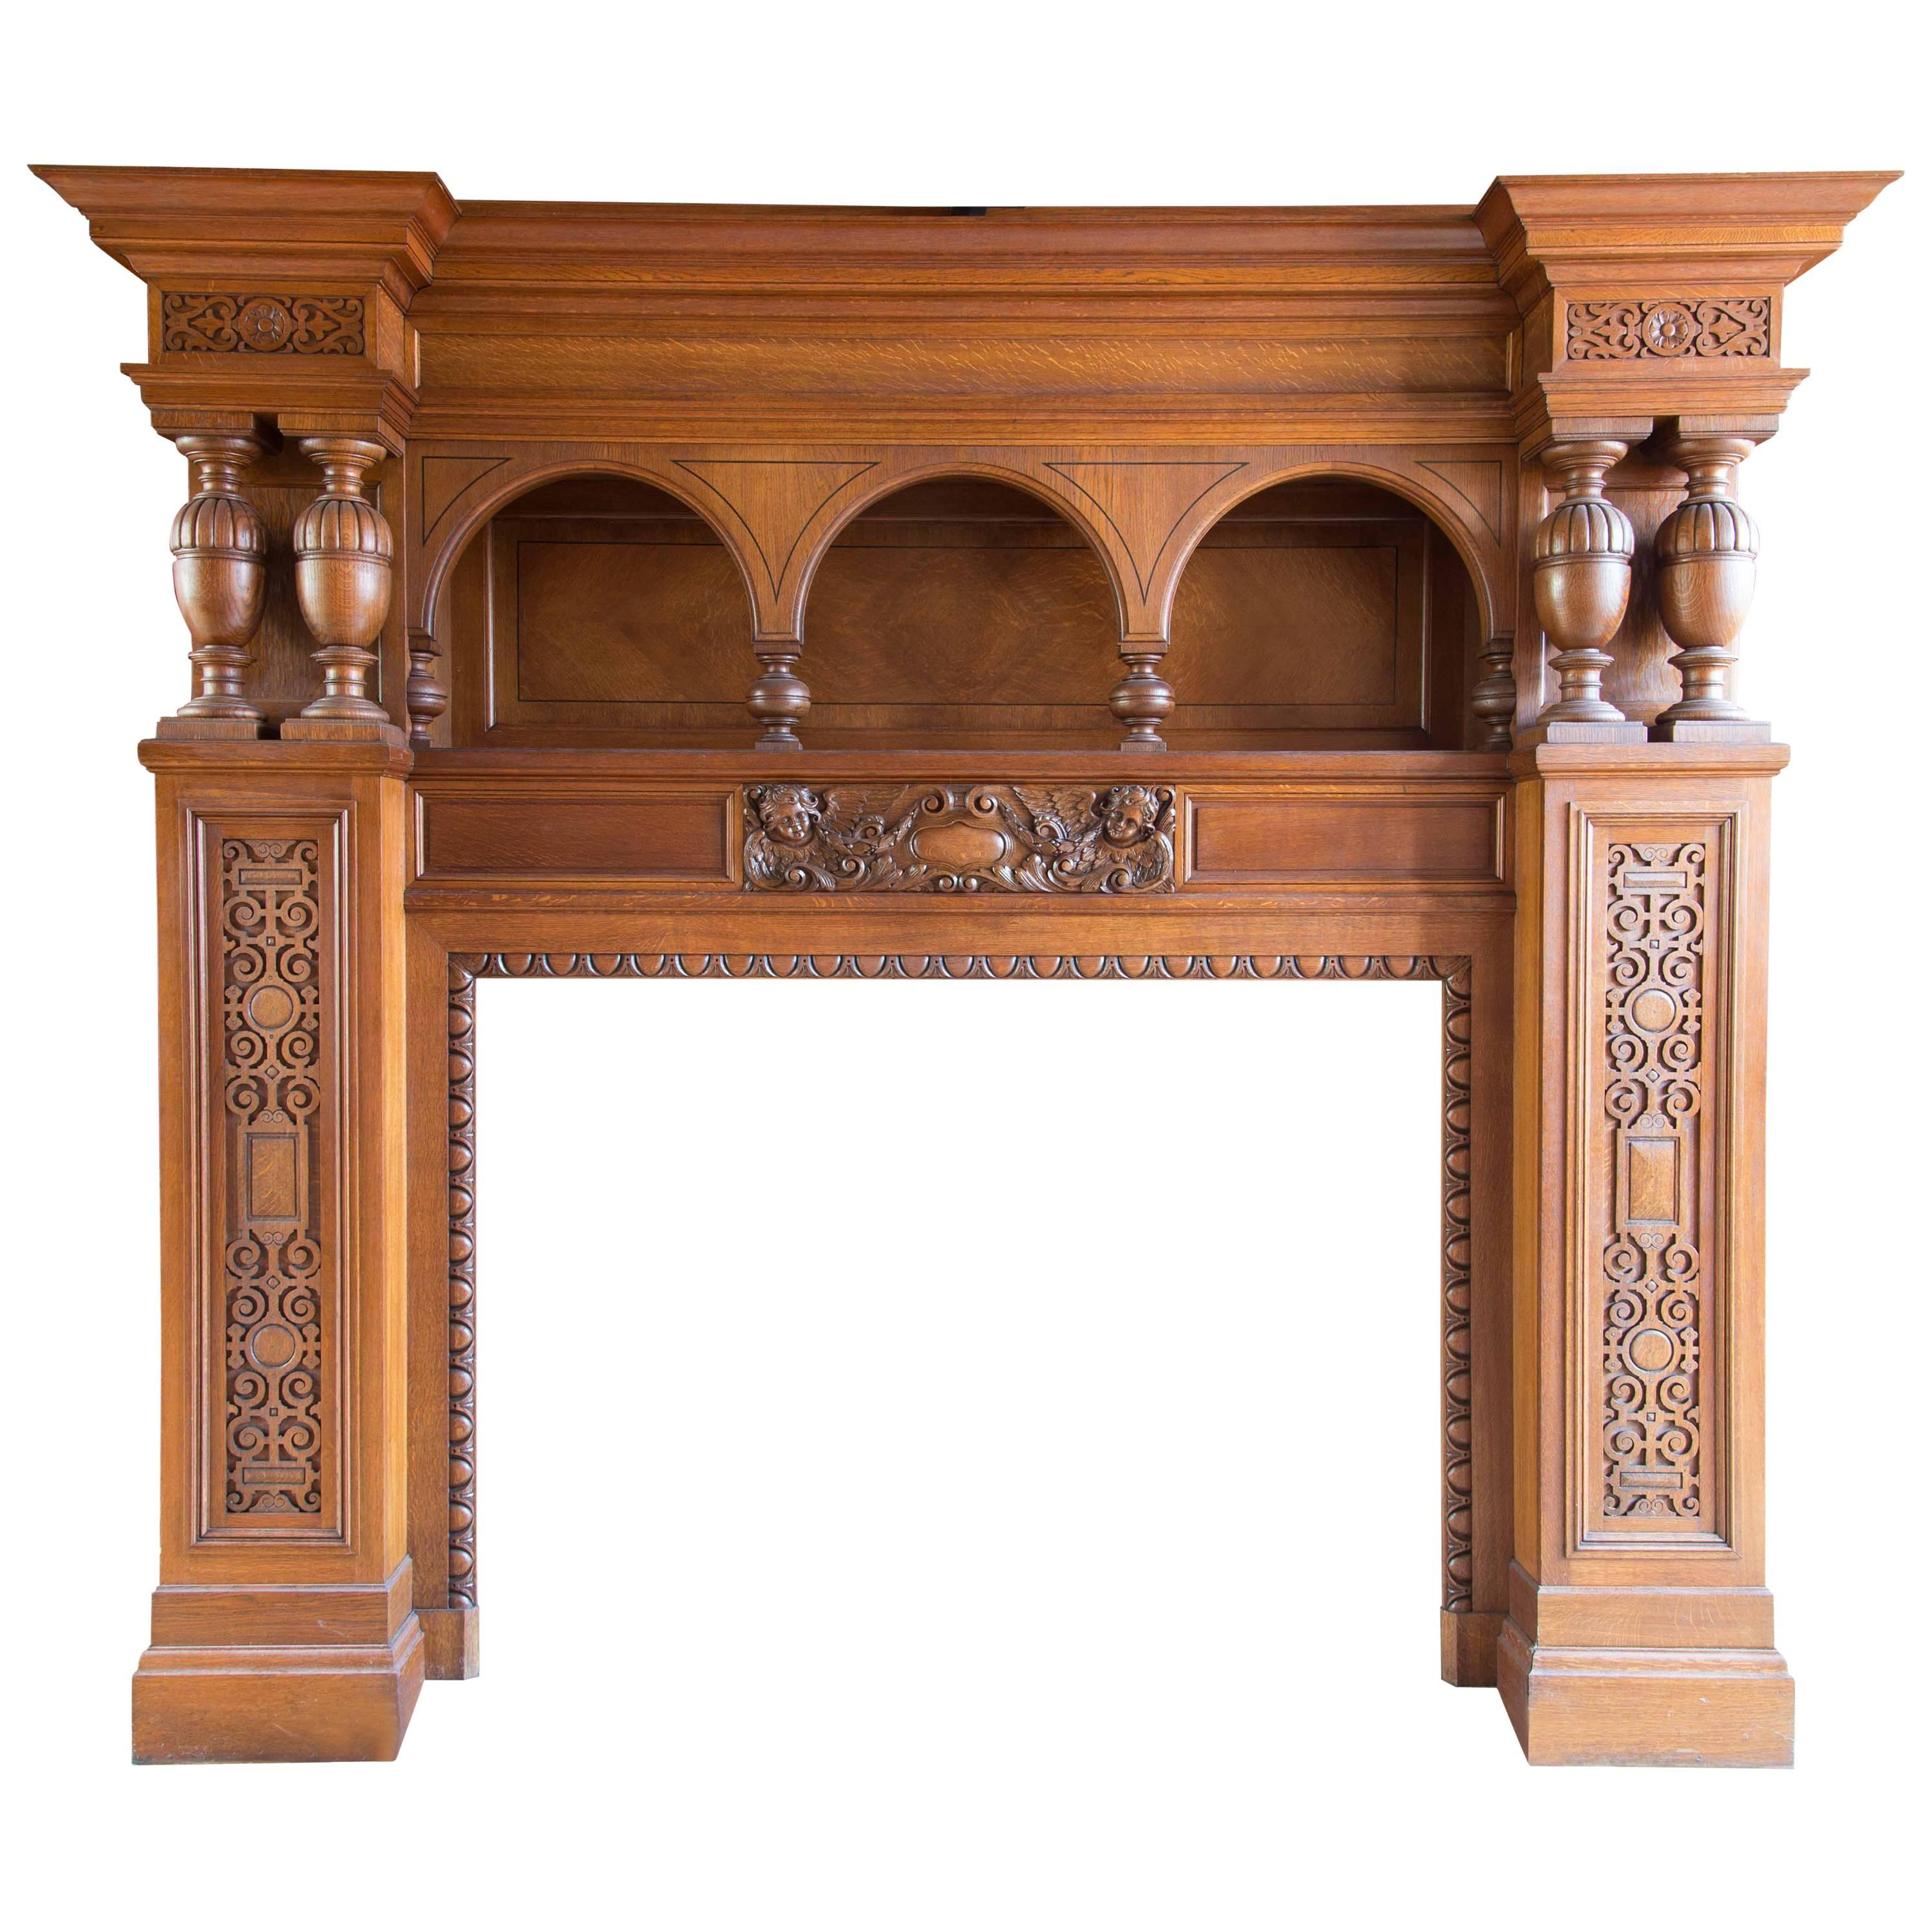 Tall Massive Antique Oak Neoclassical Fireplace Surround/Mantel For Sale